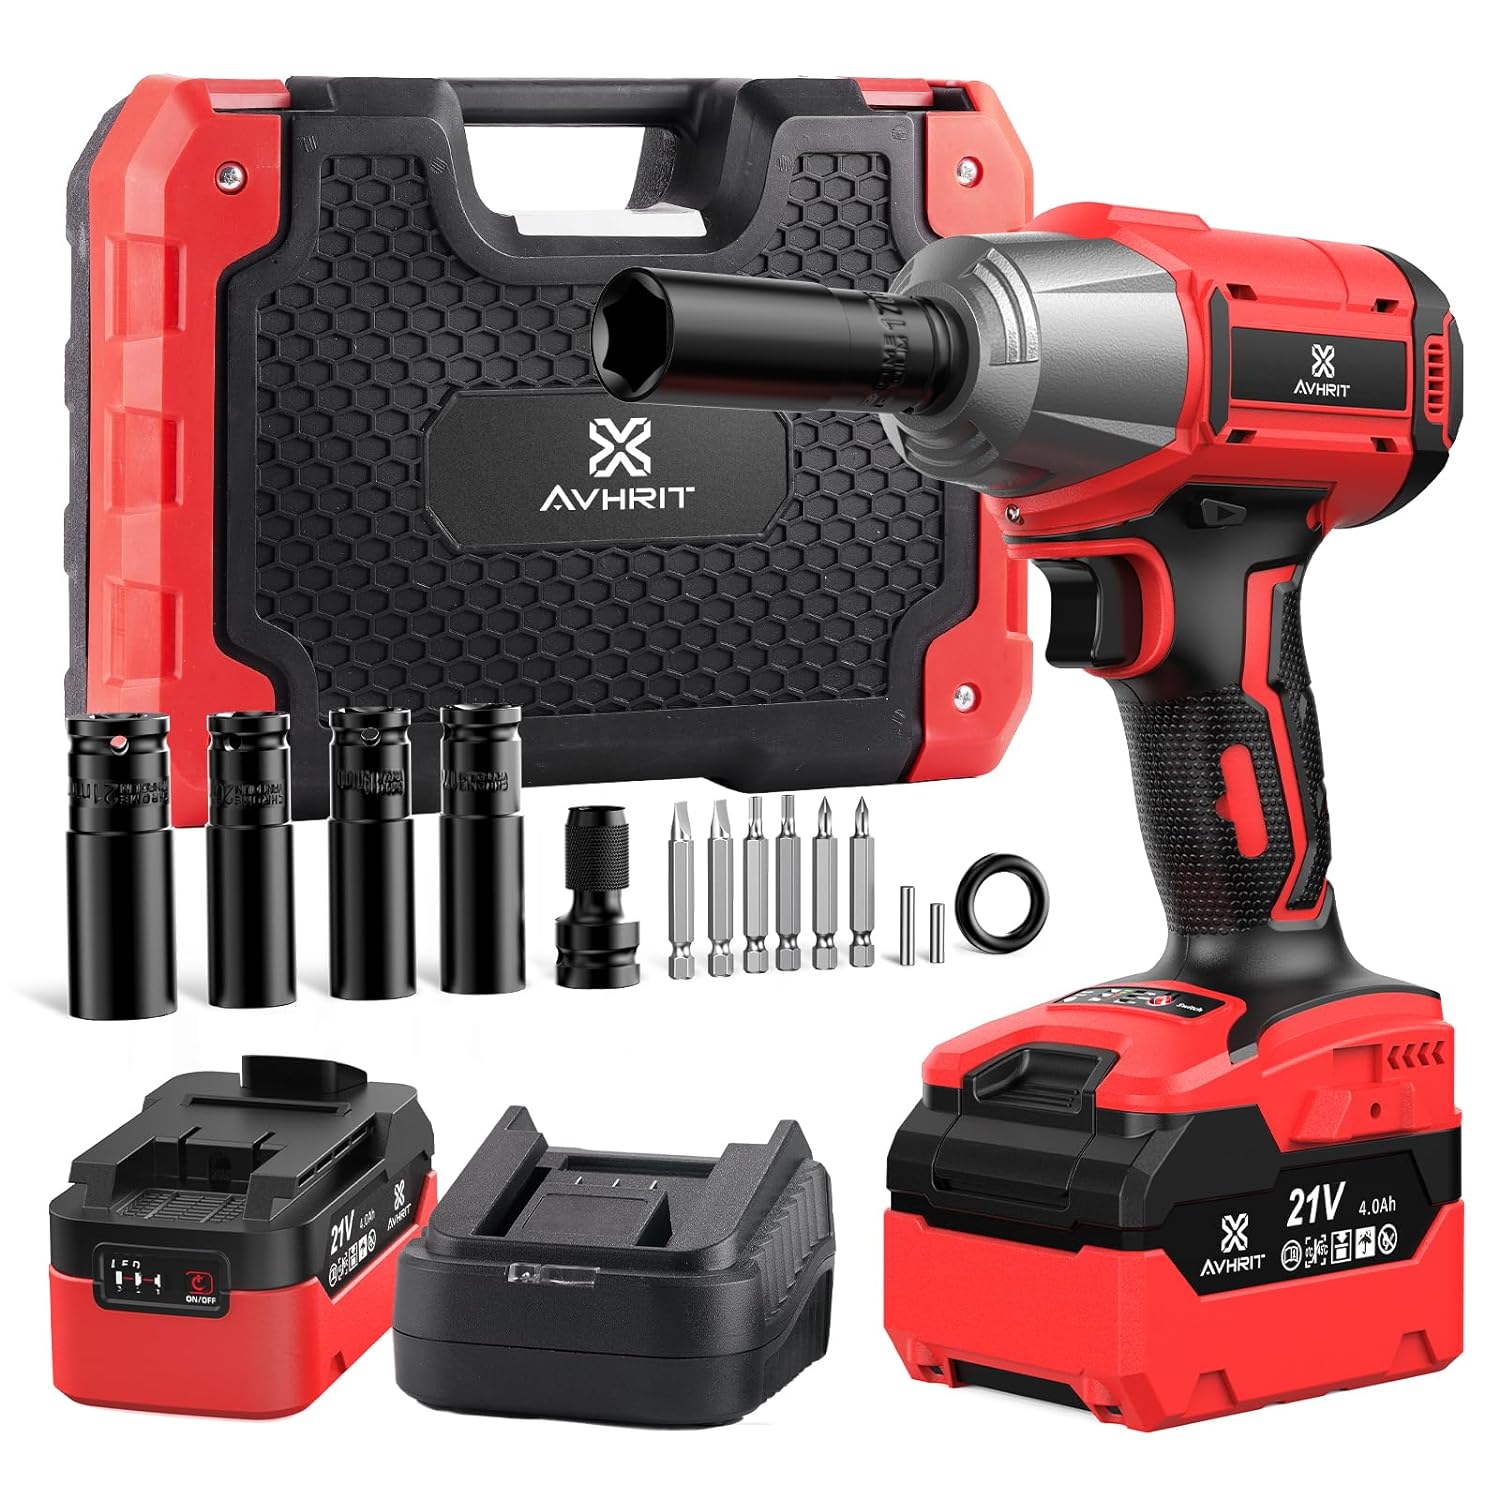 Great Choice Products Cordless Impact Wrench 1/2 Inch, 480Ft-Lbs (650Nm) Brushless Power Impact Gun 1/2 Drive W/ 4.0Ah Battery, 4 Sockets, 6 Screwd…